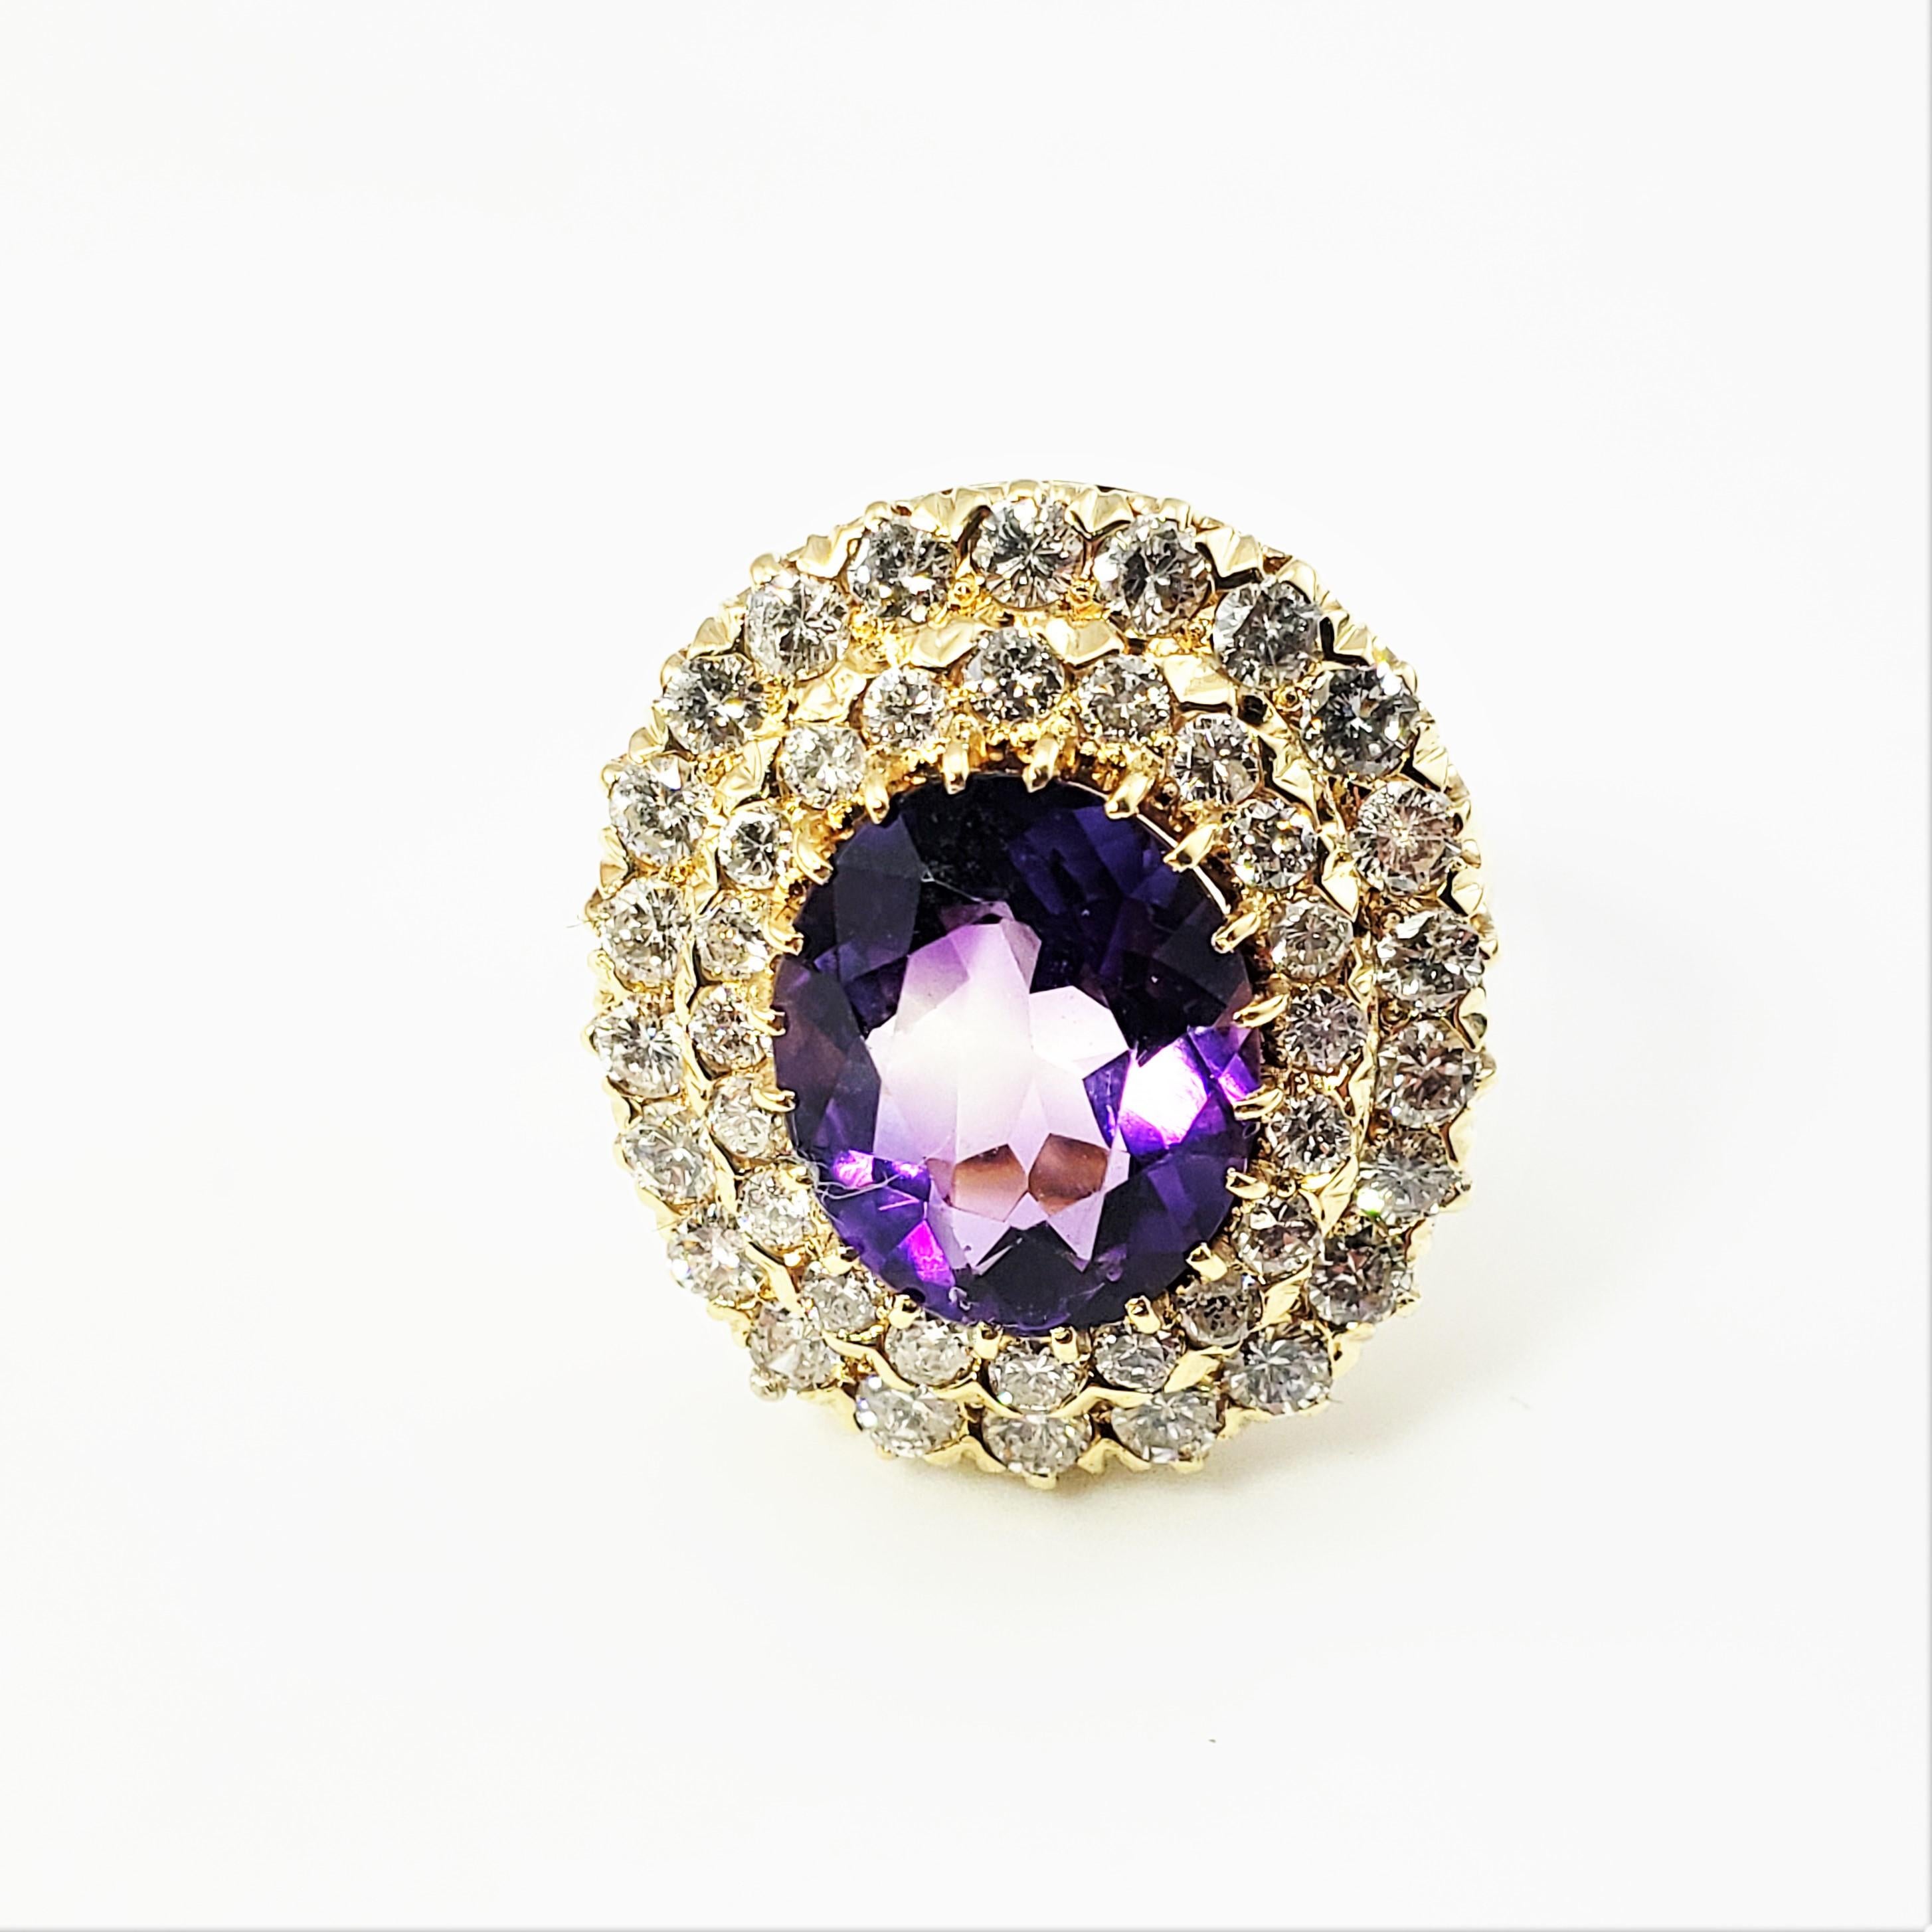 14 Karat Yellow Gold Amethyst and Diamond Ring Size 6.75 GAI Certified-

This stunning ring features one oval amethyst gem (13 mm x 11 mm) surrounded by 42 round brilliant cut diamonds set in classic 14K yellow gold.  Top of ring measures 22 mm x 20